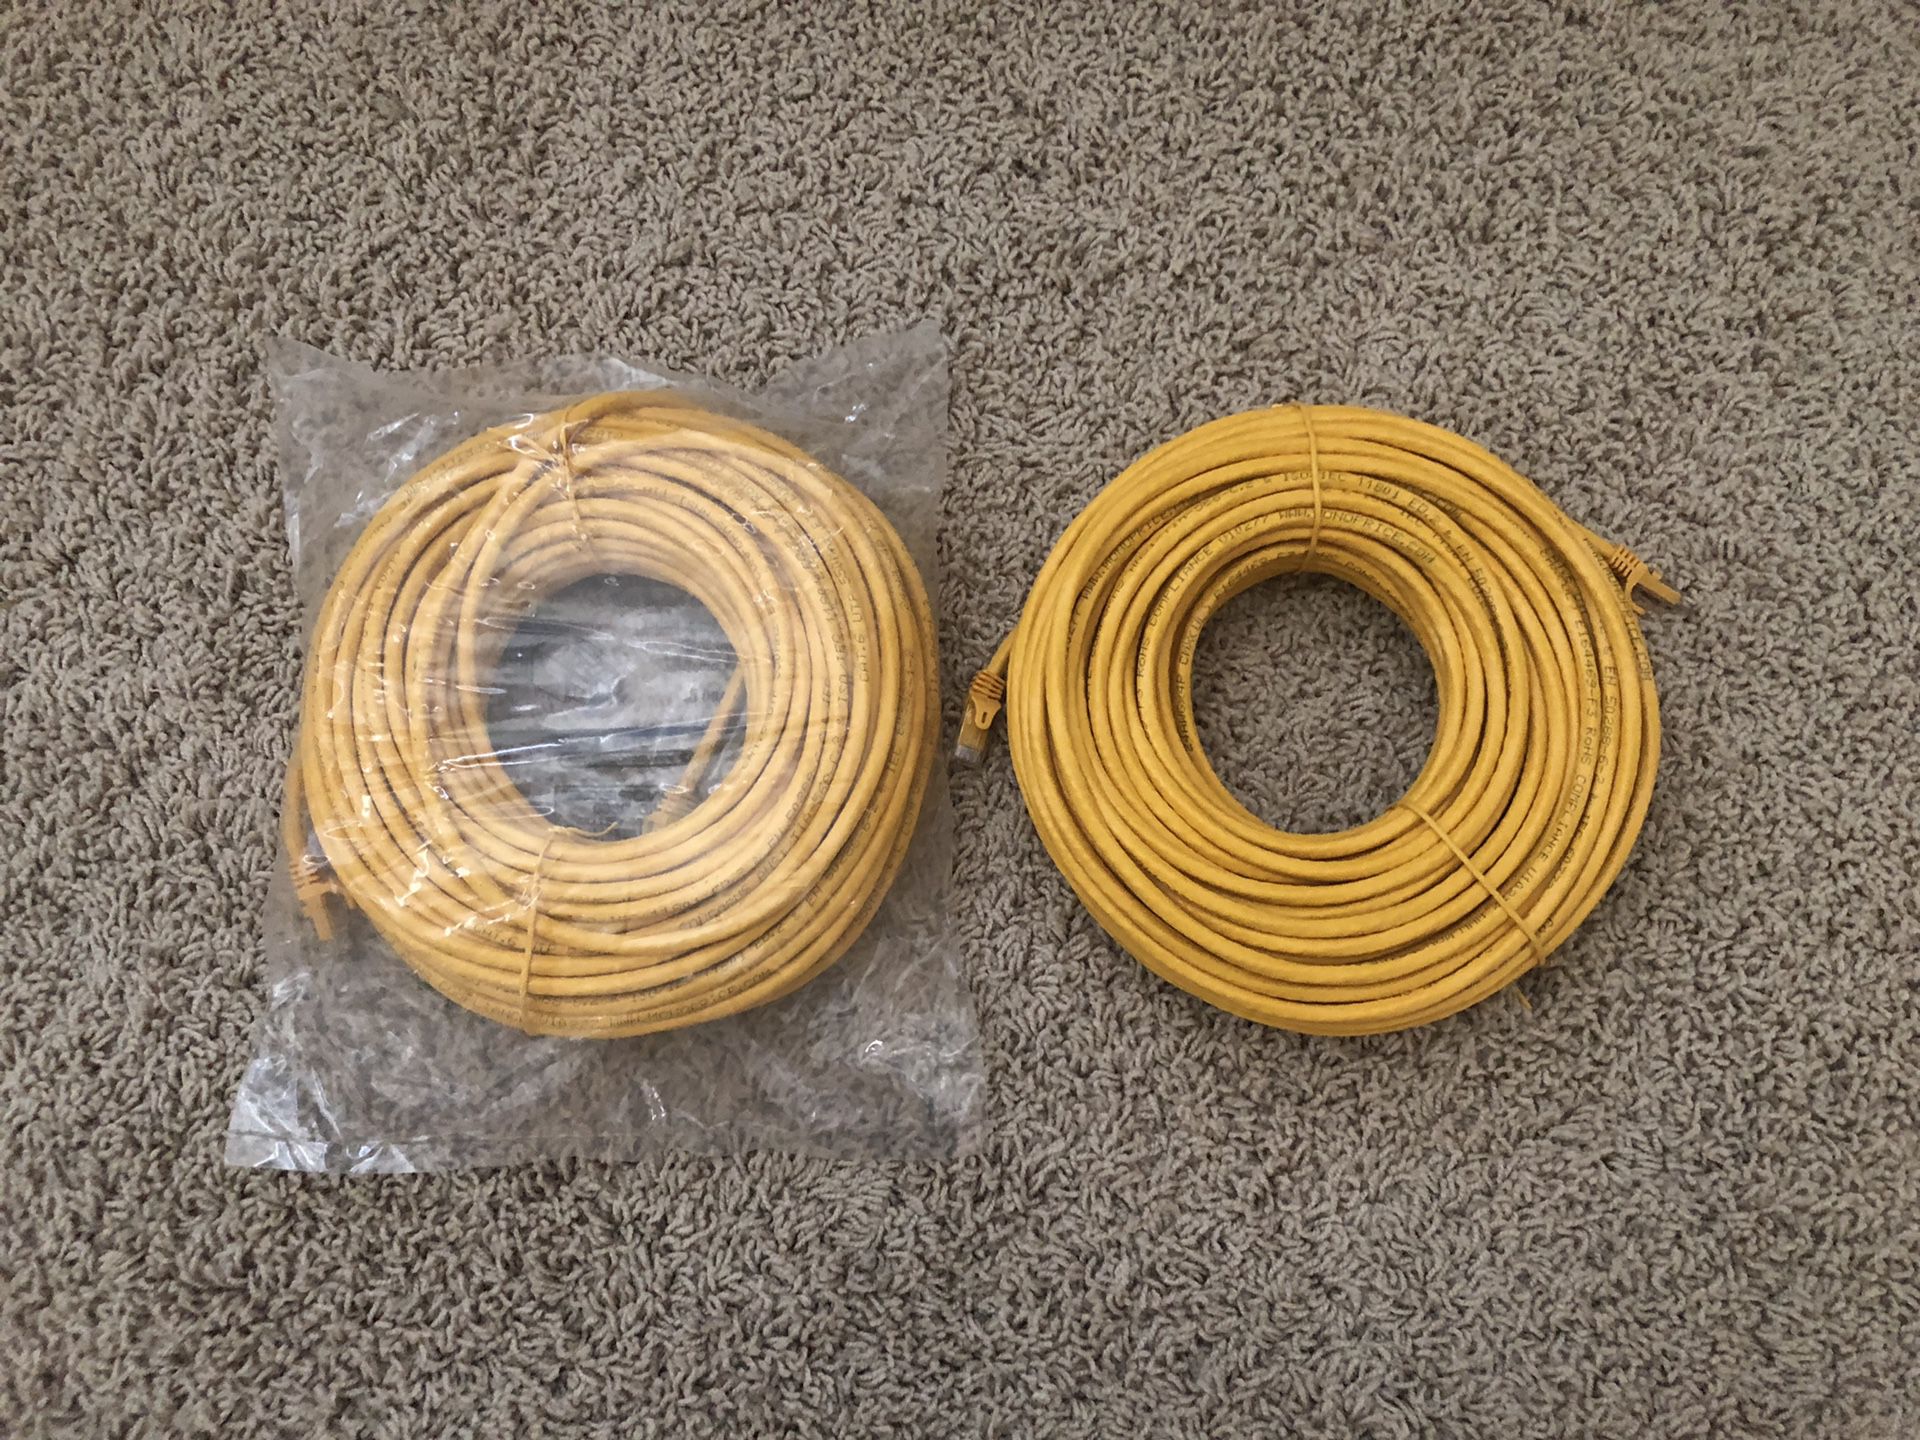 New Yellow 100 feet Cat 6 cable